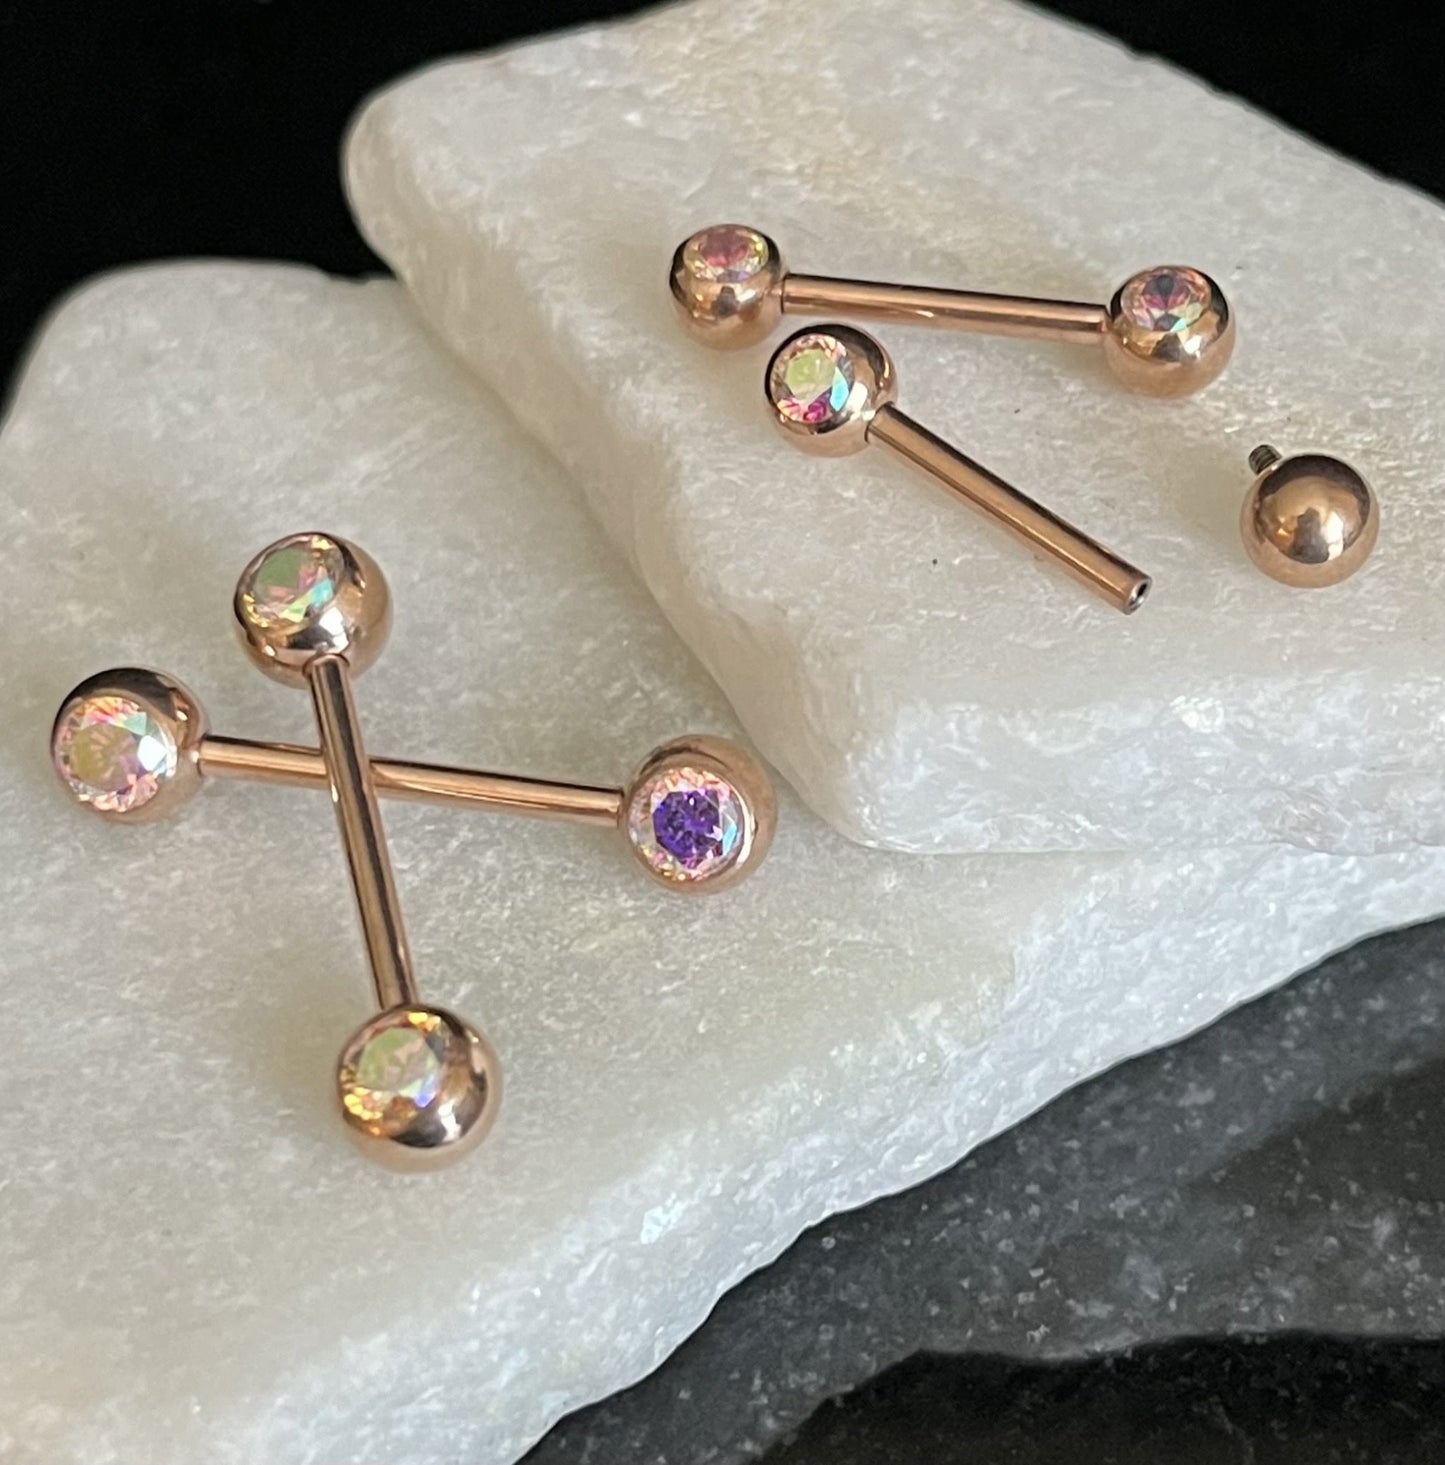 PAIR of Stunning Implant Grade Titanium Front CZ Gem Internally Threaded Industrial Barbell Rings - 14g - Length 12mm or 16mm Available!